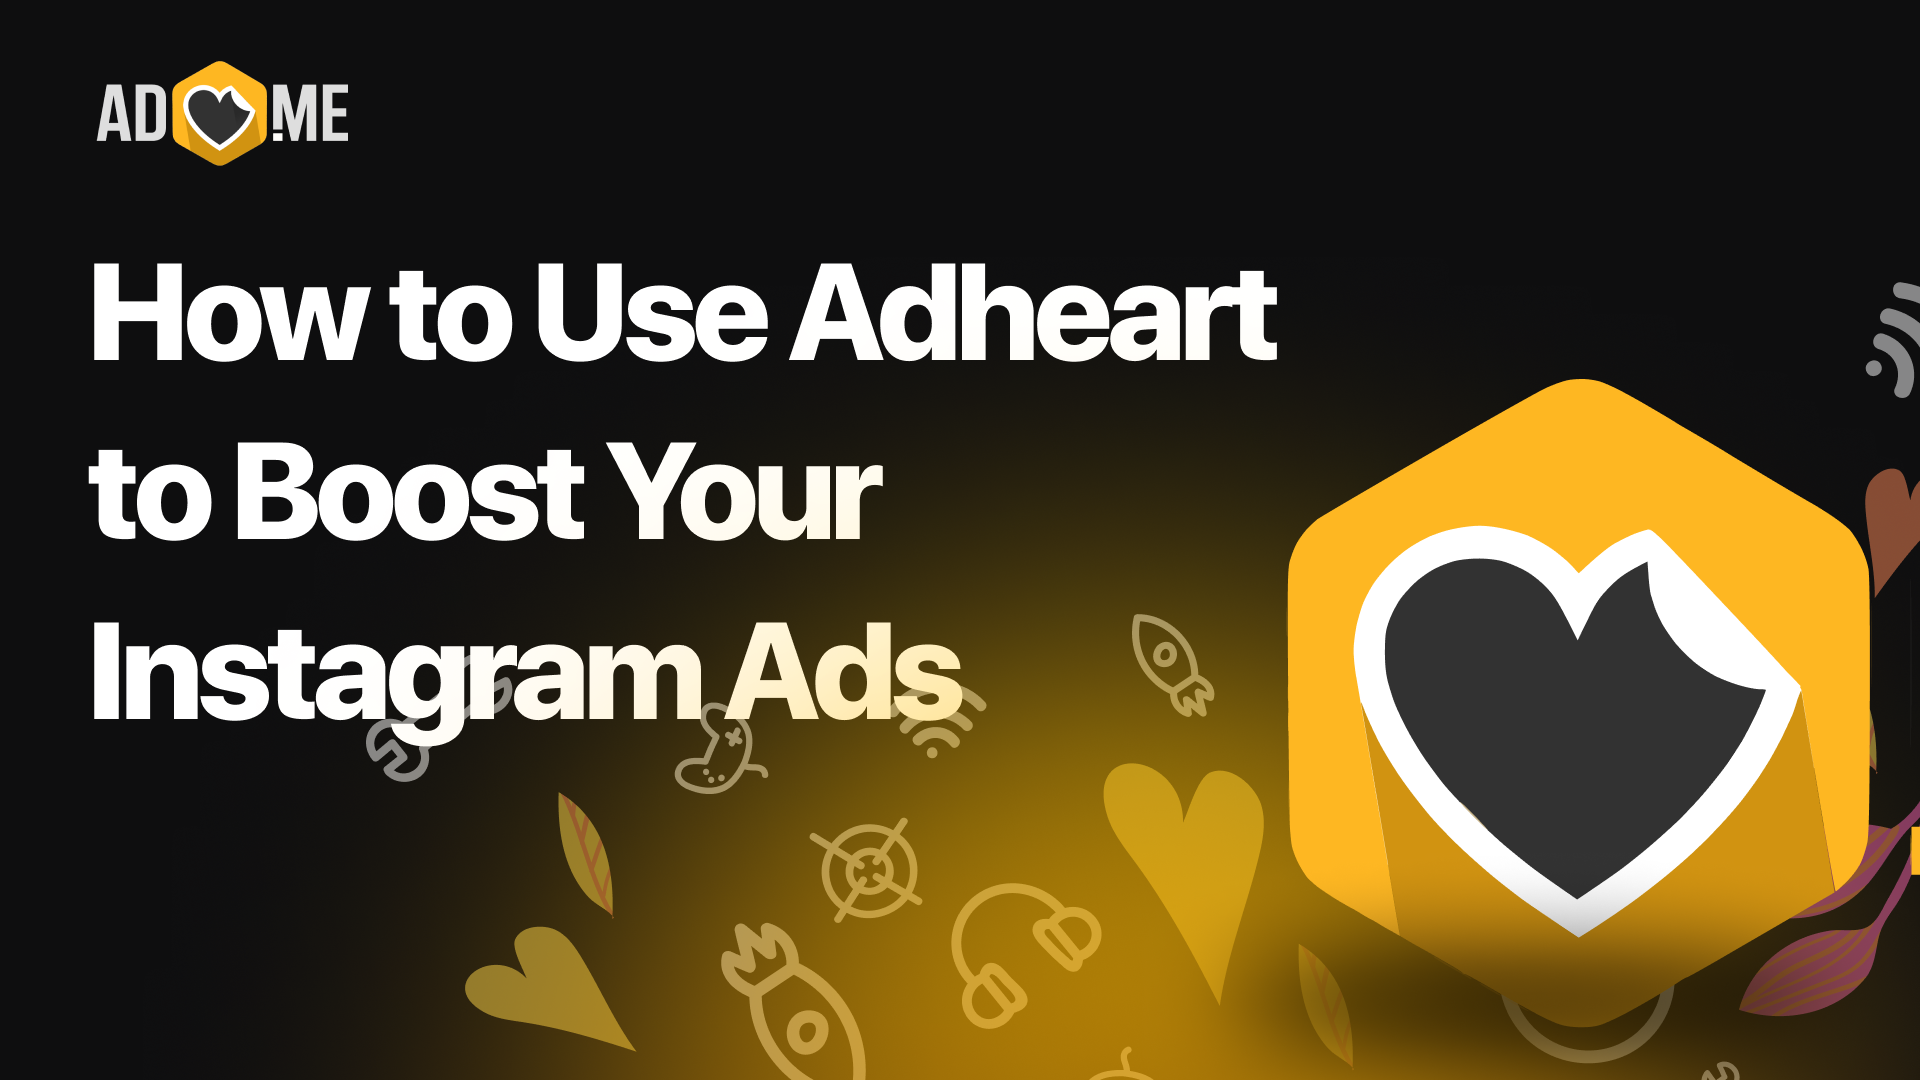 How to Use Adheart to Boost Your Instagram Ads